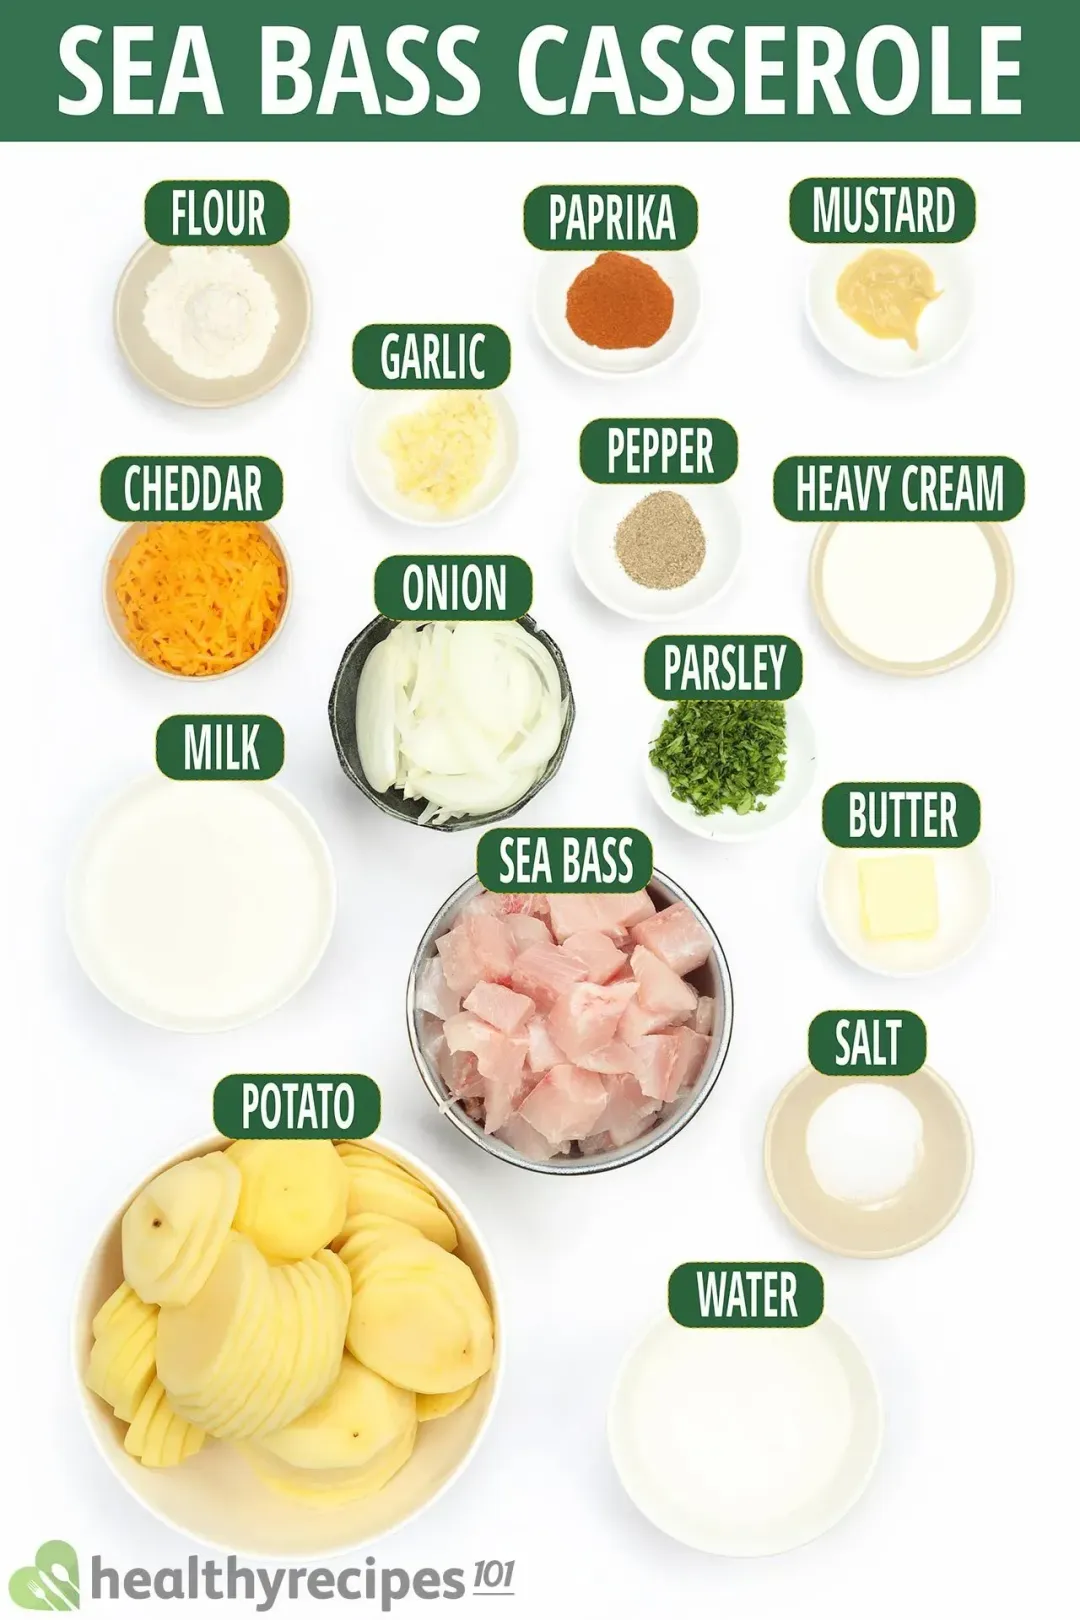 Ingredients for Sea Bass Casserole